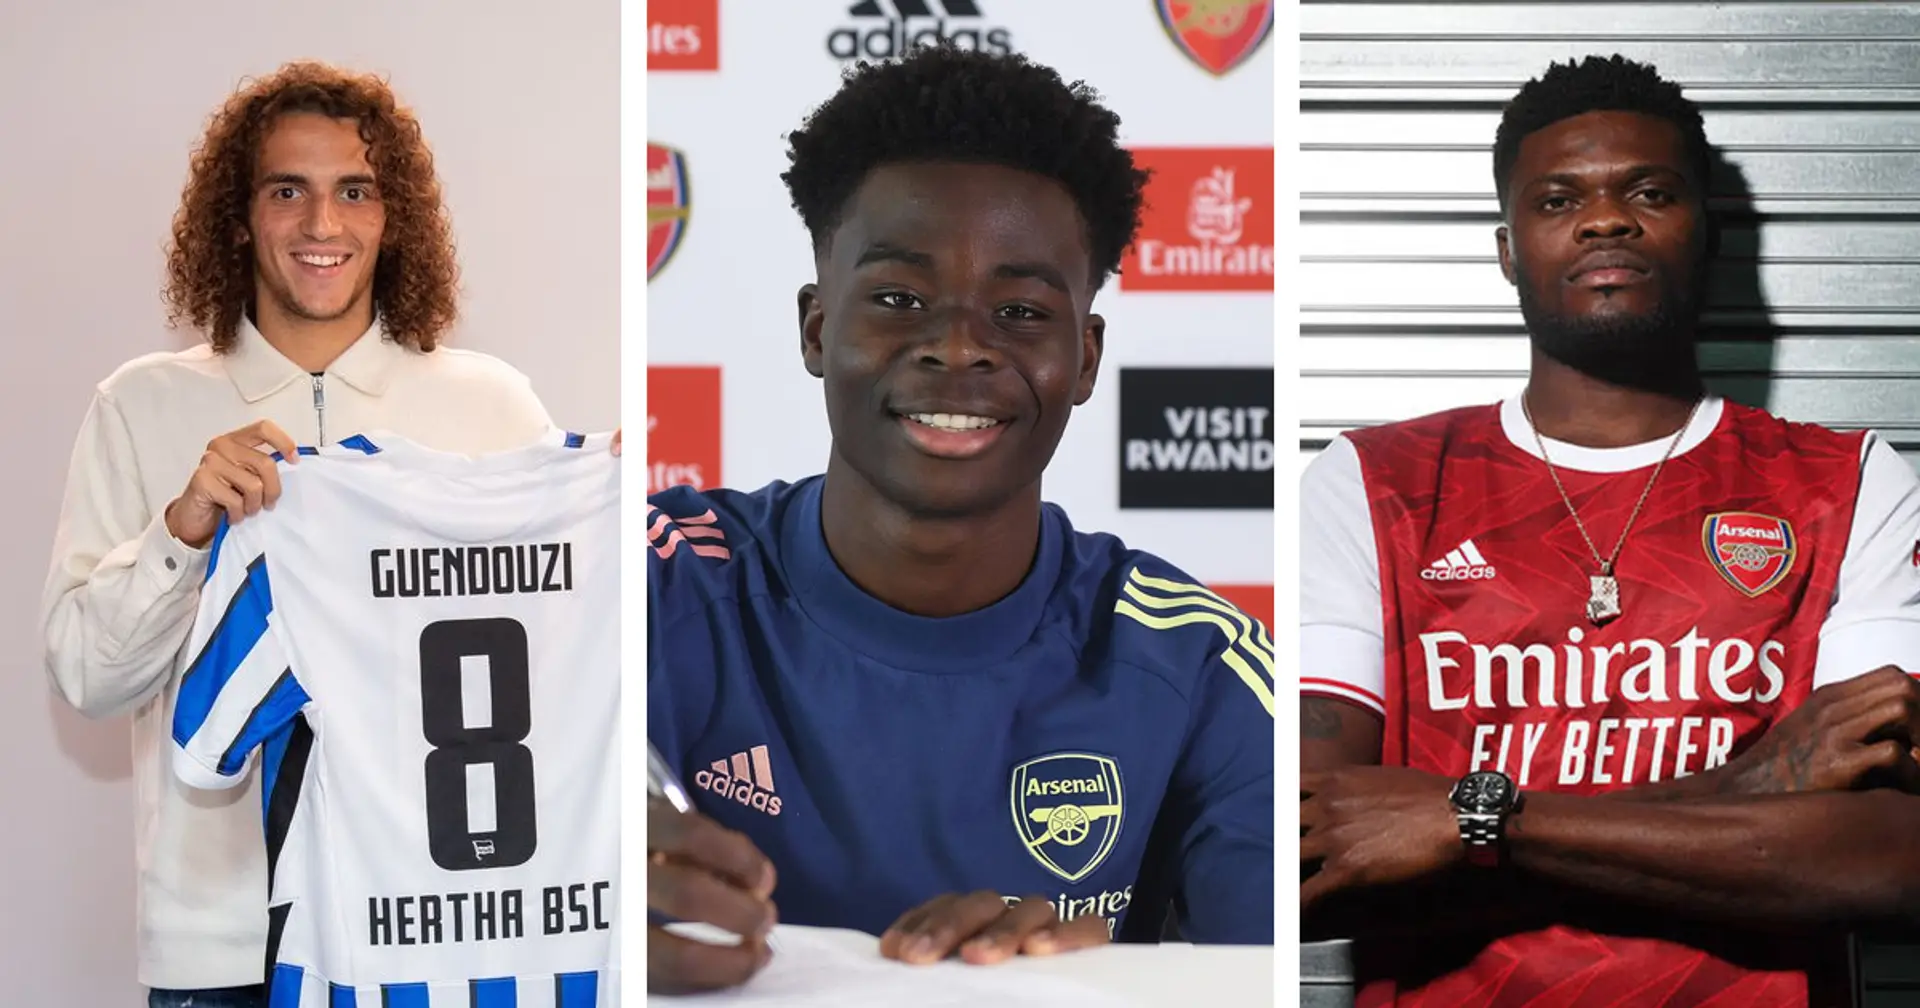 Smart loan deals, Partey capture & 5 more things Arsenal did right in transfer market